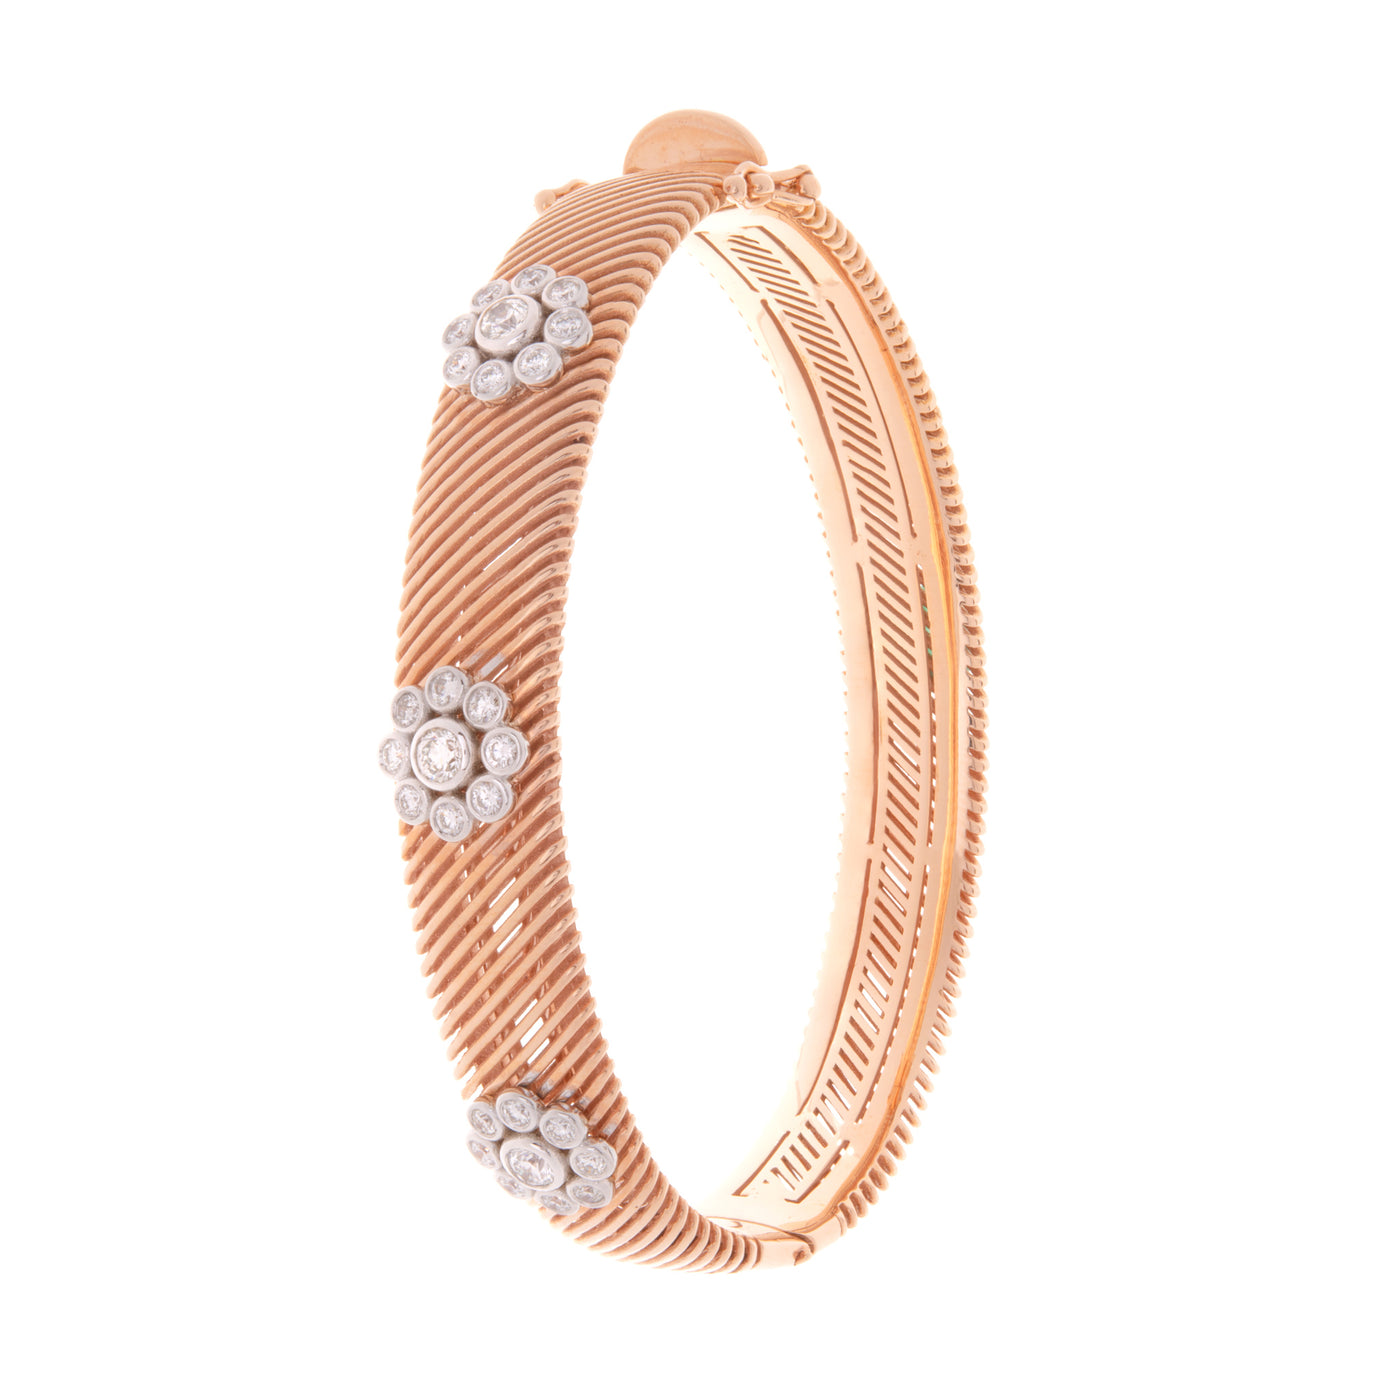 Soit Belle Rose Gold Vintage With Three Scattered Flower Diamond Bangle